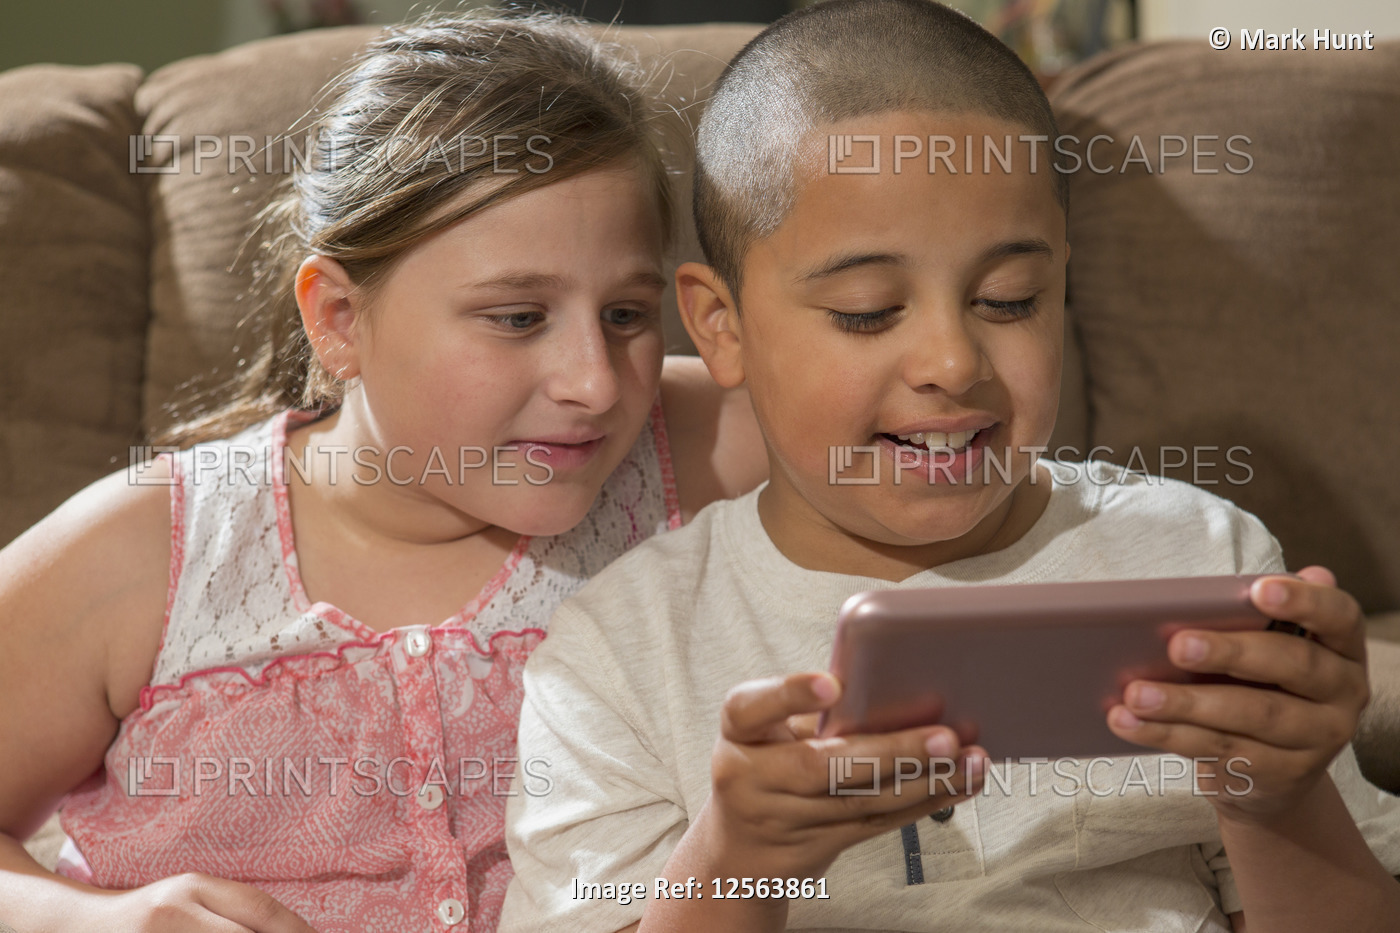 Hispanic boy with Autism playing an electronic game with his sister at home